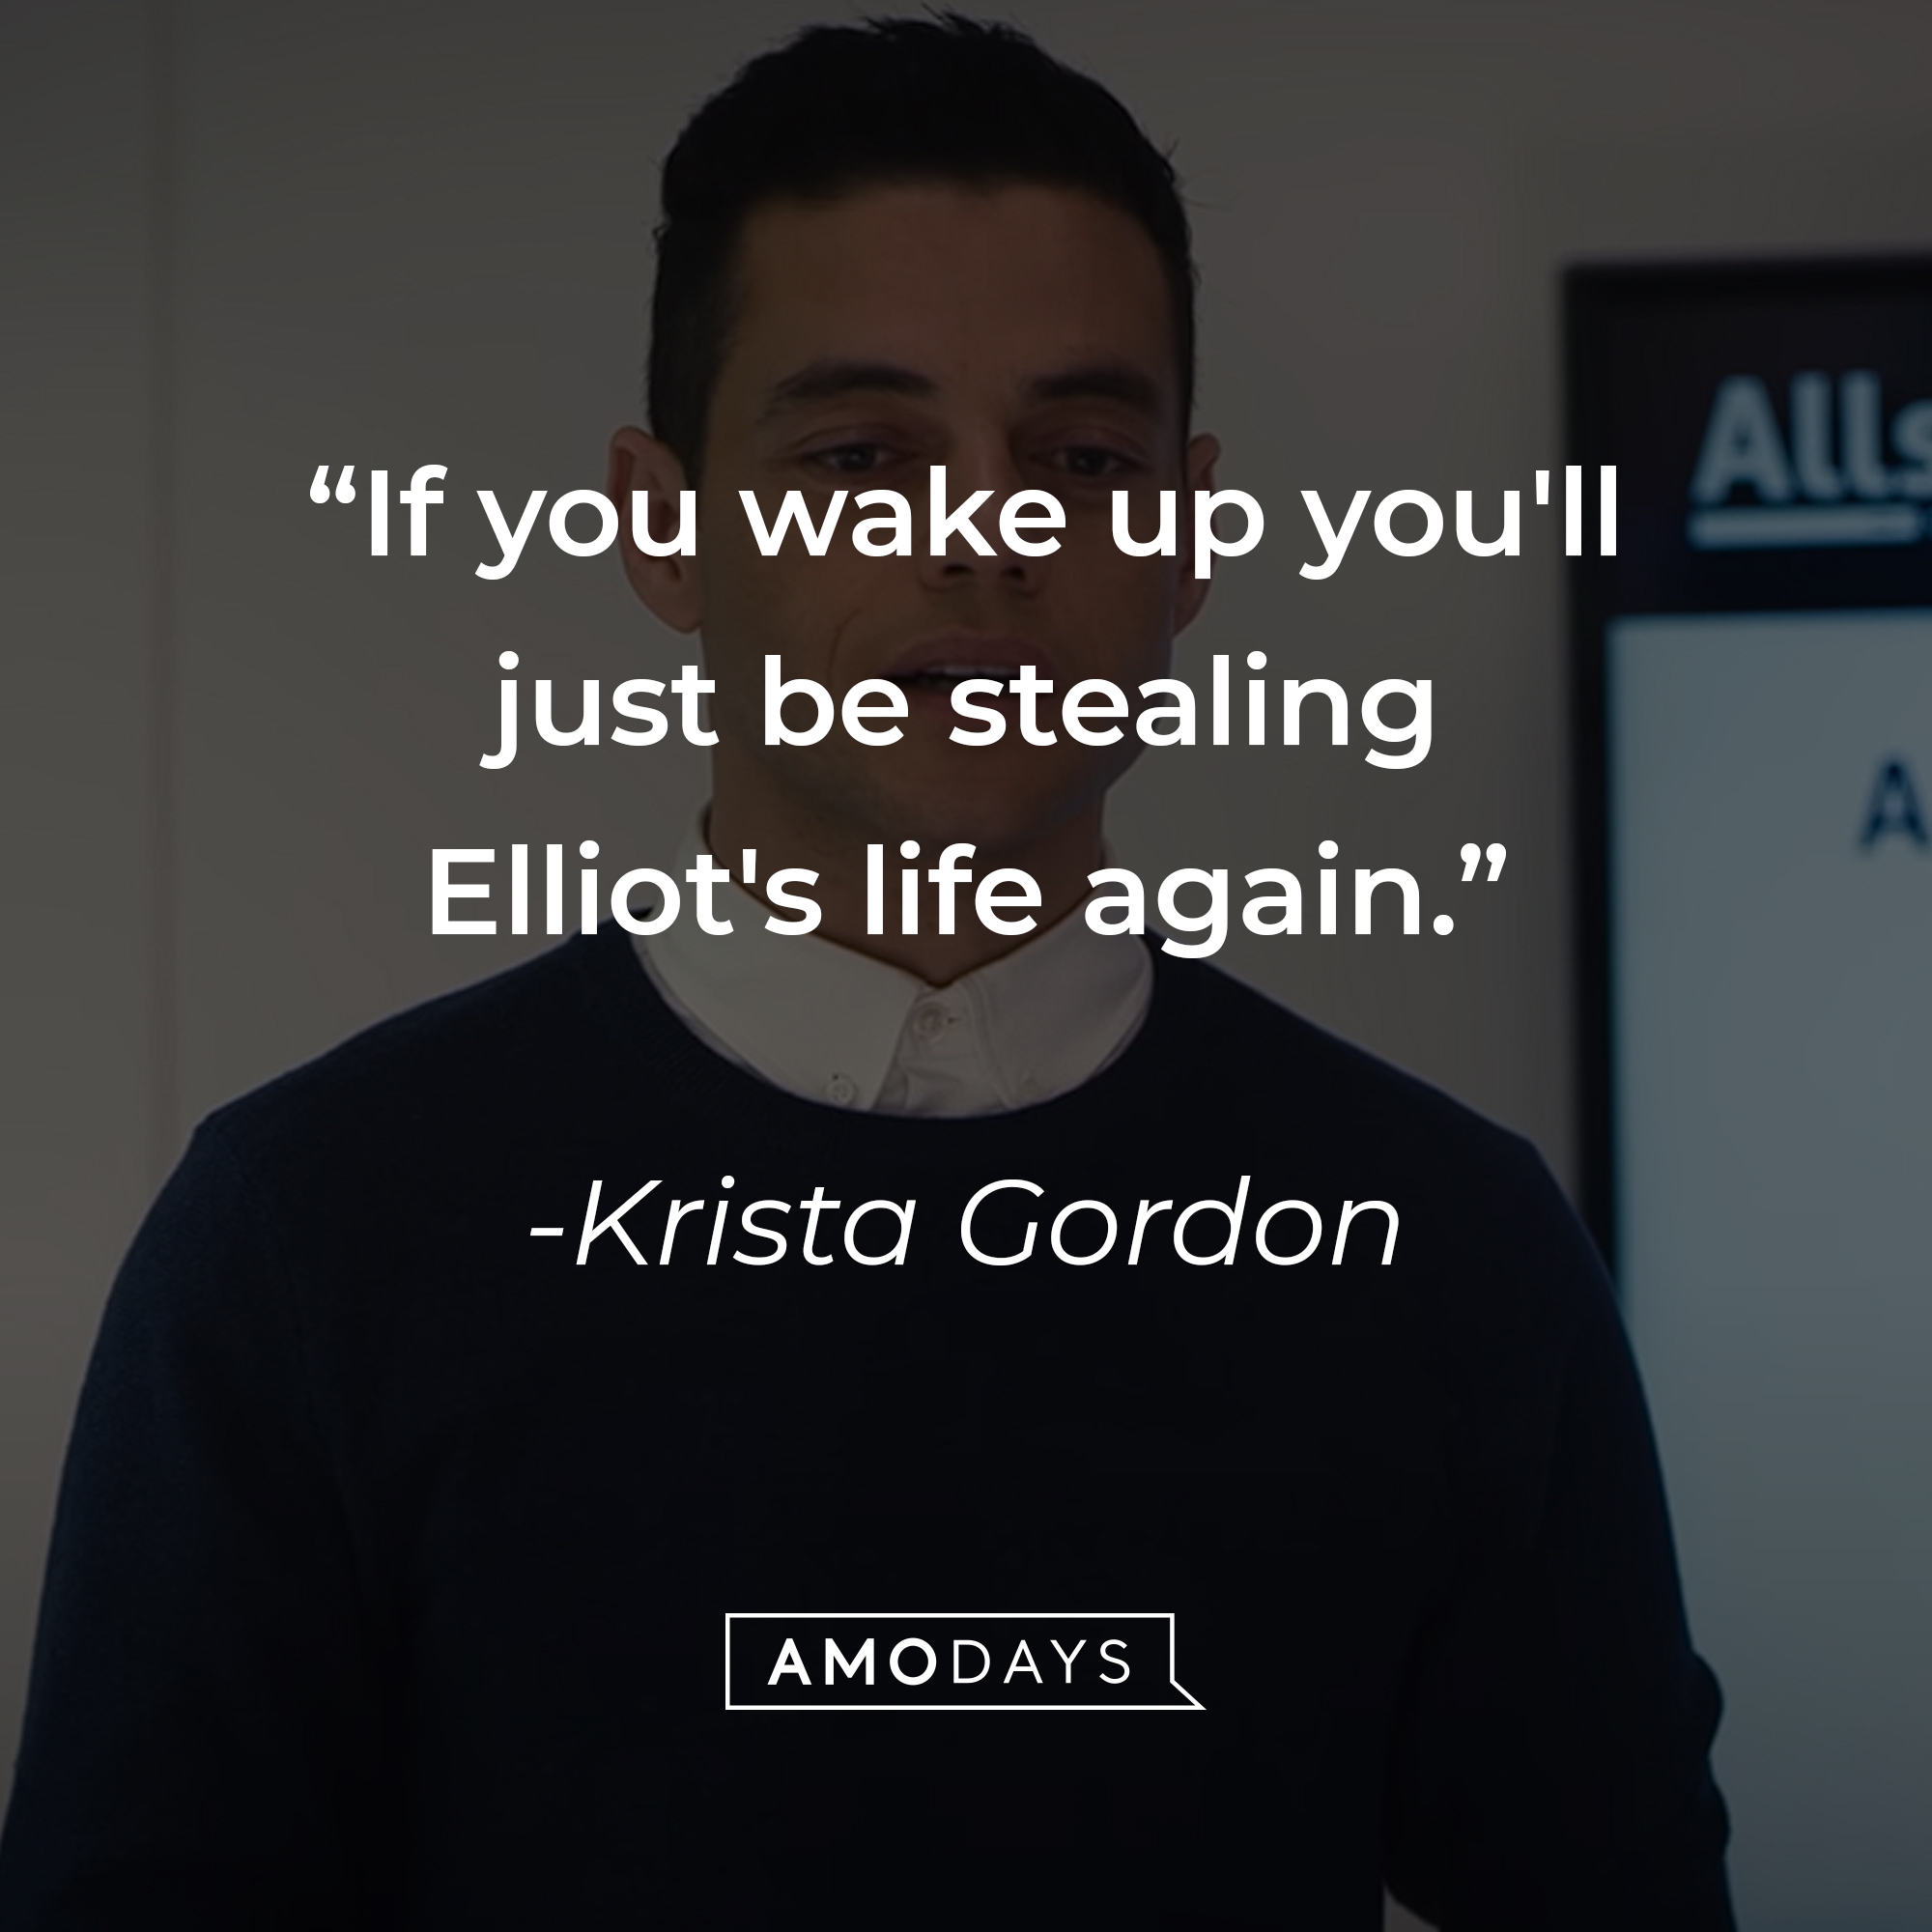 Krista Gordon's quote: "If you wake up you'll just be stealing Elliot's life again." | Source: youtube.com/MrRobot